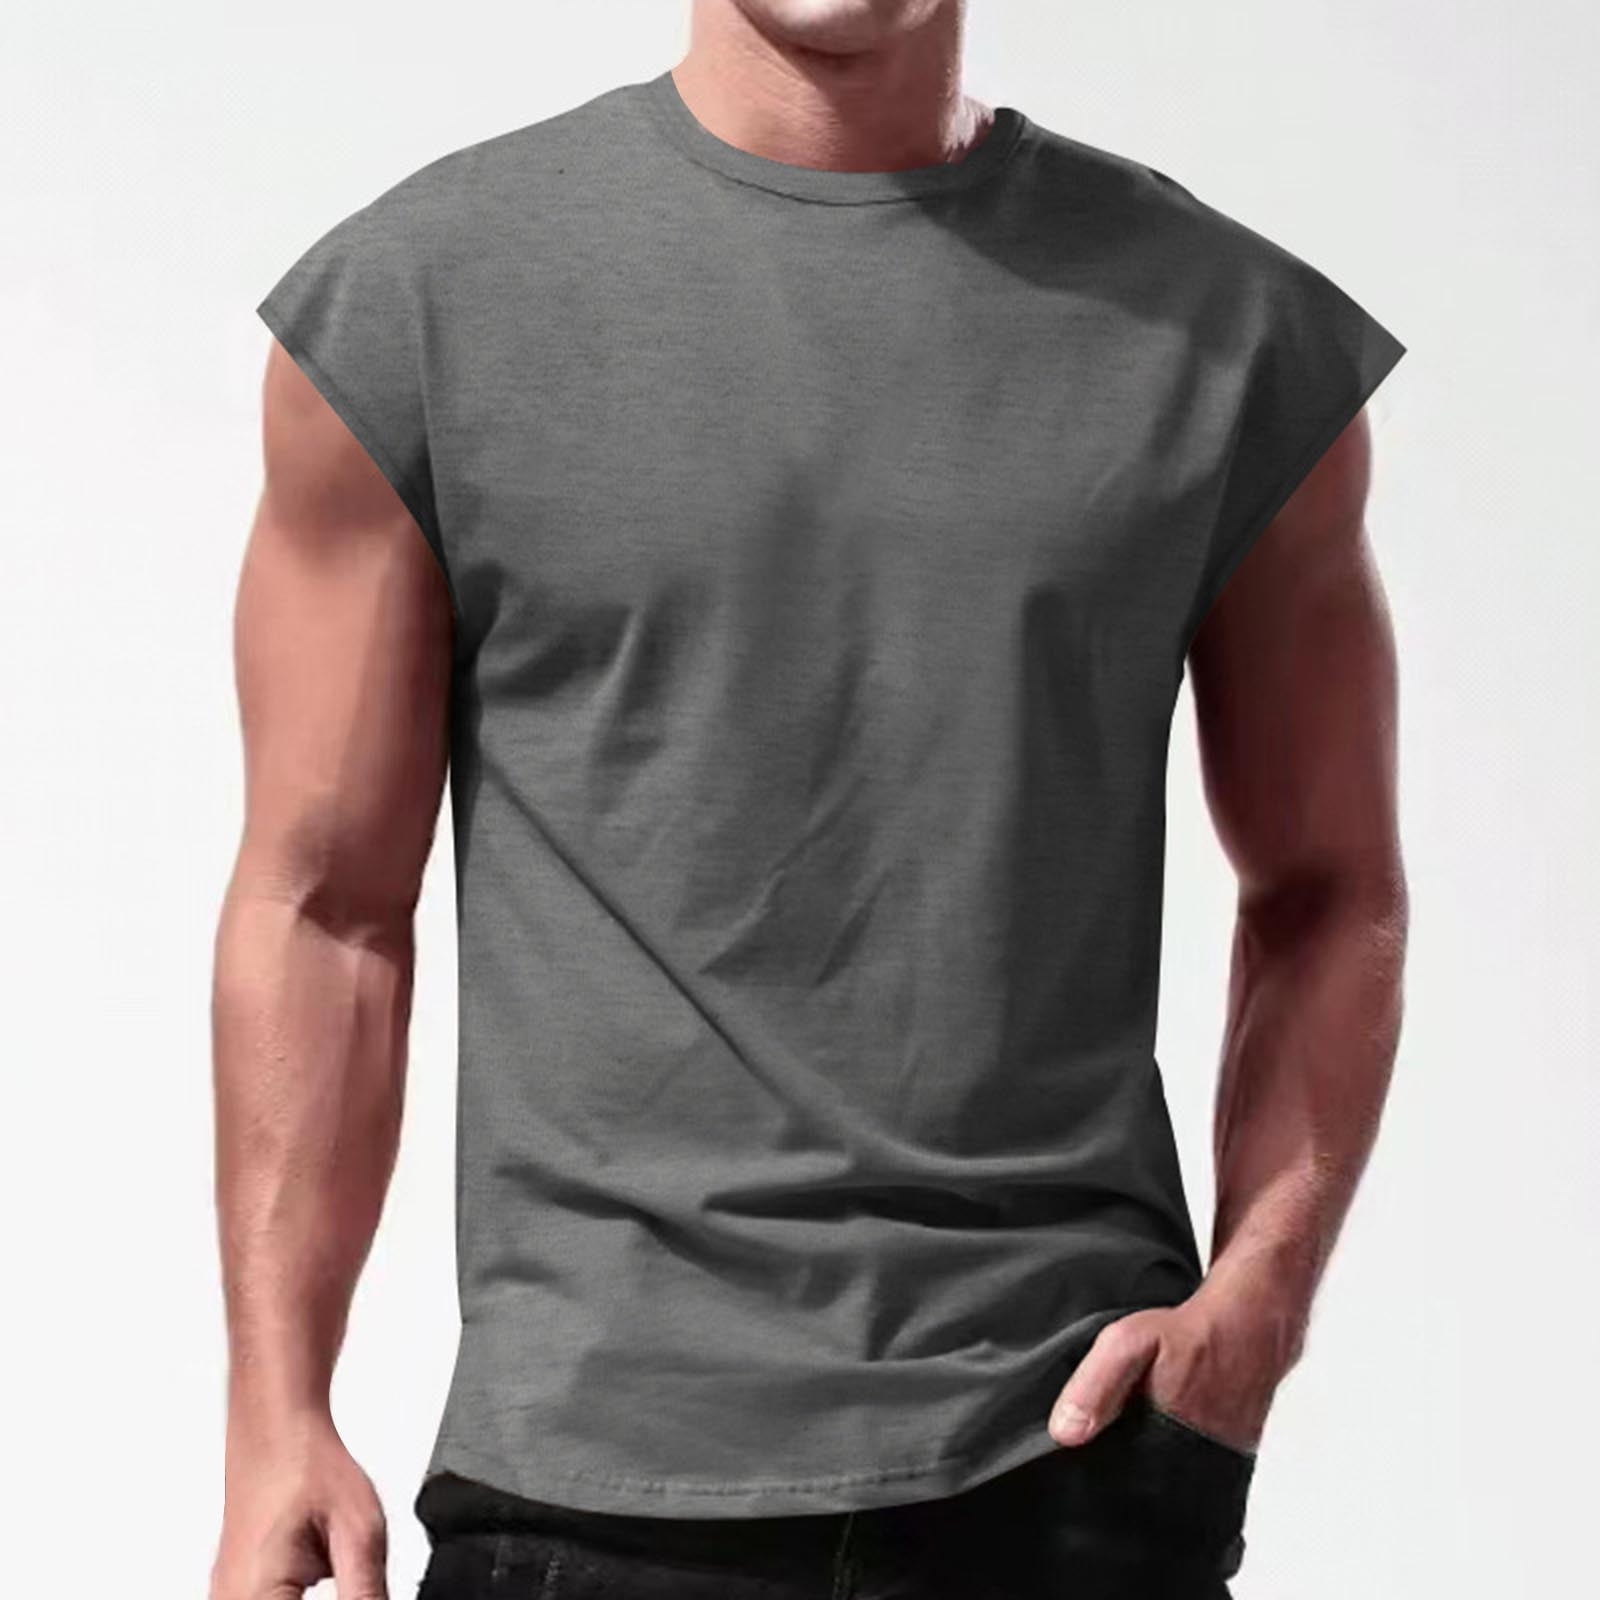 JOFOW Men's Muscle Fit Sleeveless T-Shirts Solid Moisture Wicking Loose ...